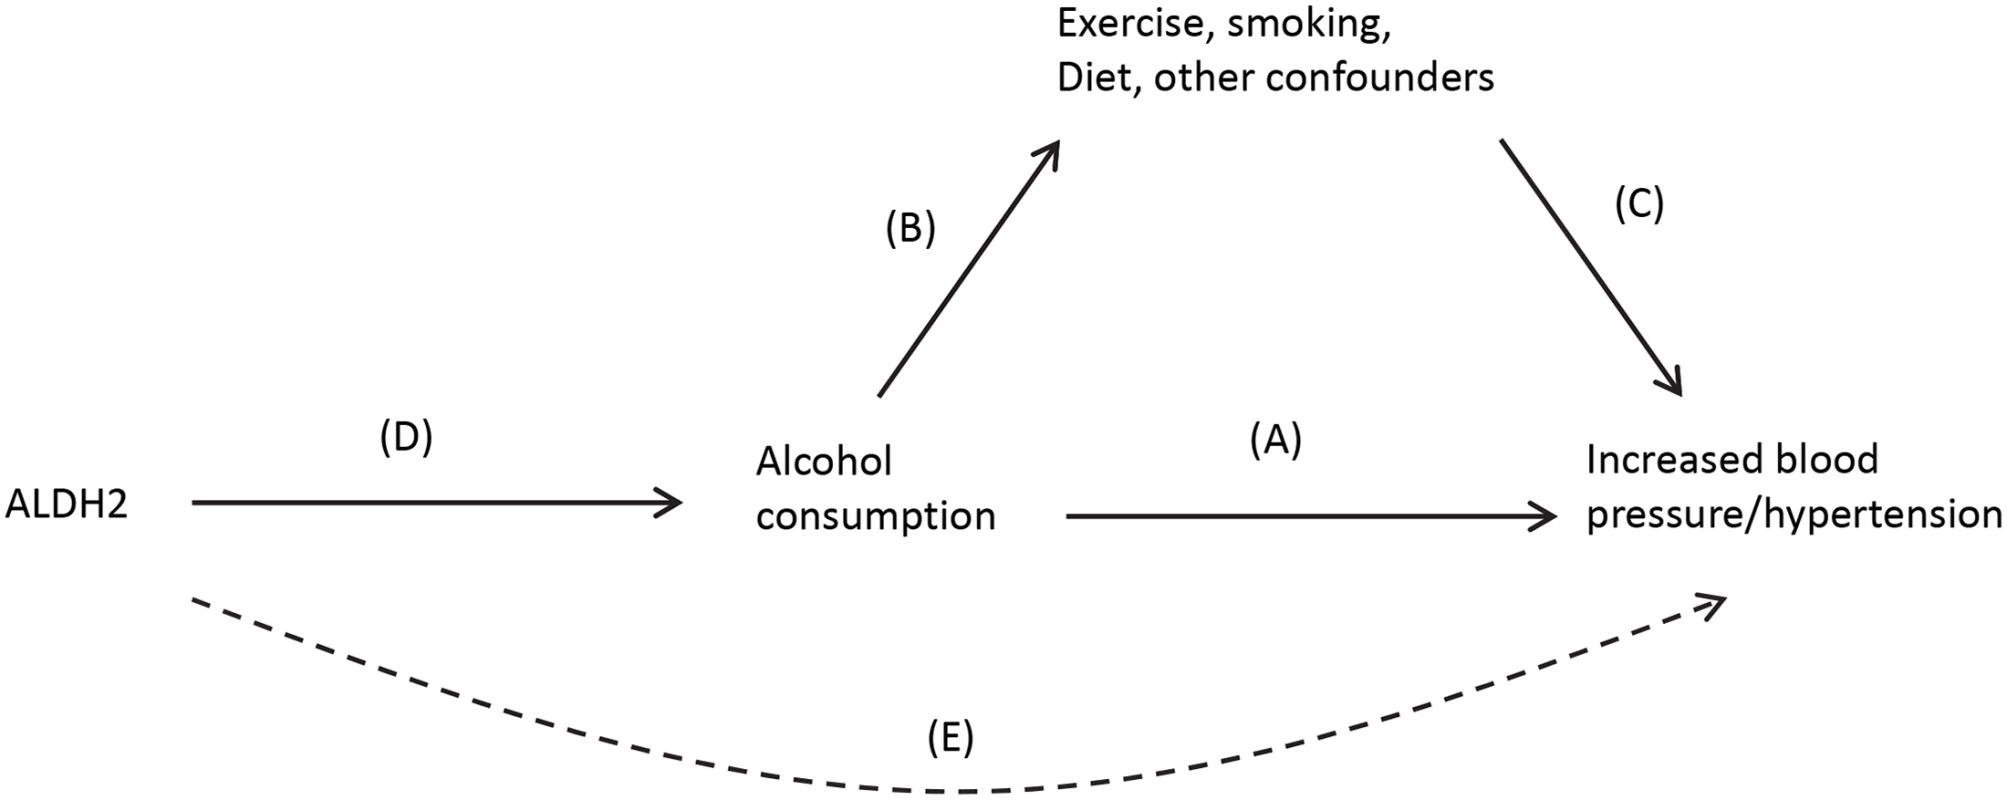 Causal pathway indicating how ALDH2 is an unconfounded marker (or instrument) of alcohol consumption in the association between alcohol and blood pressure.